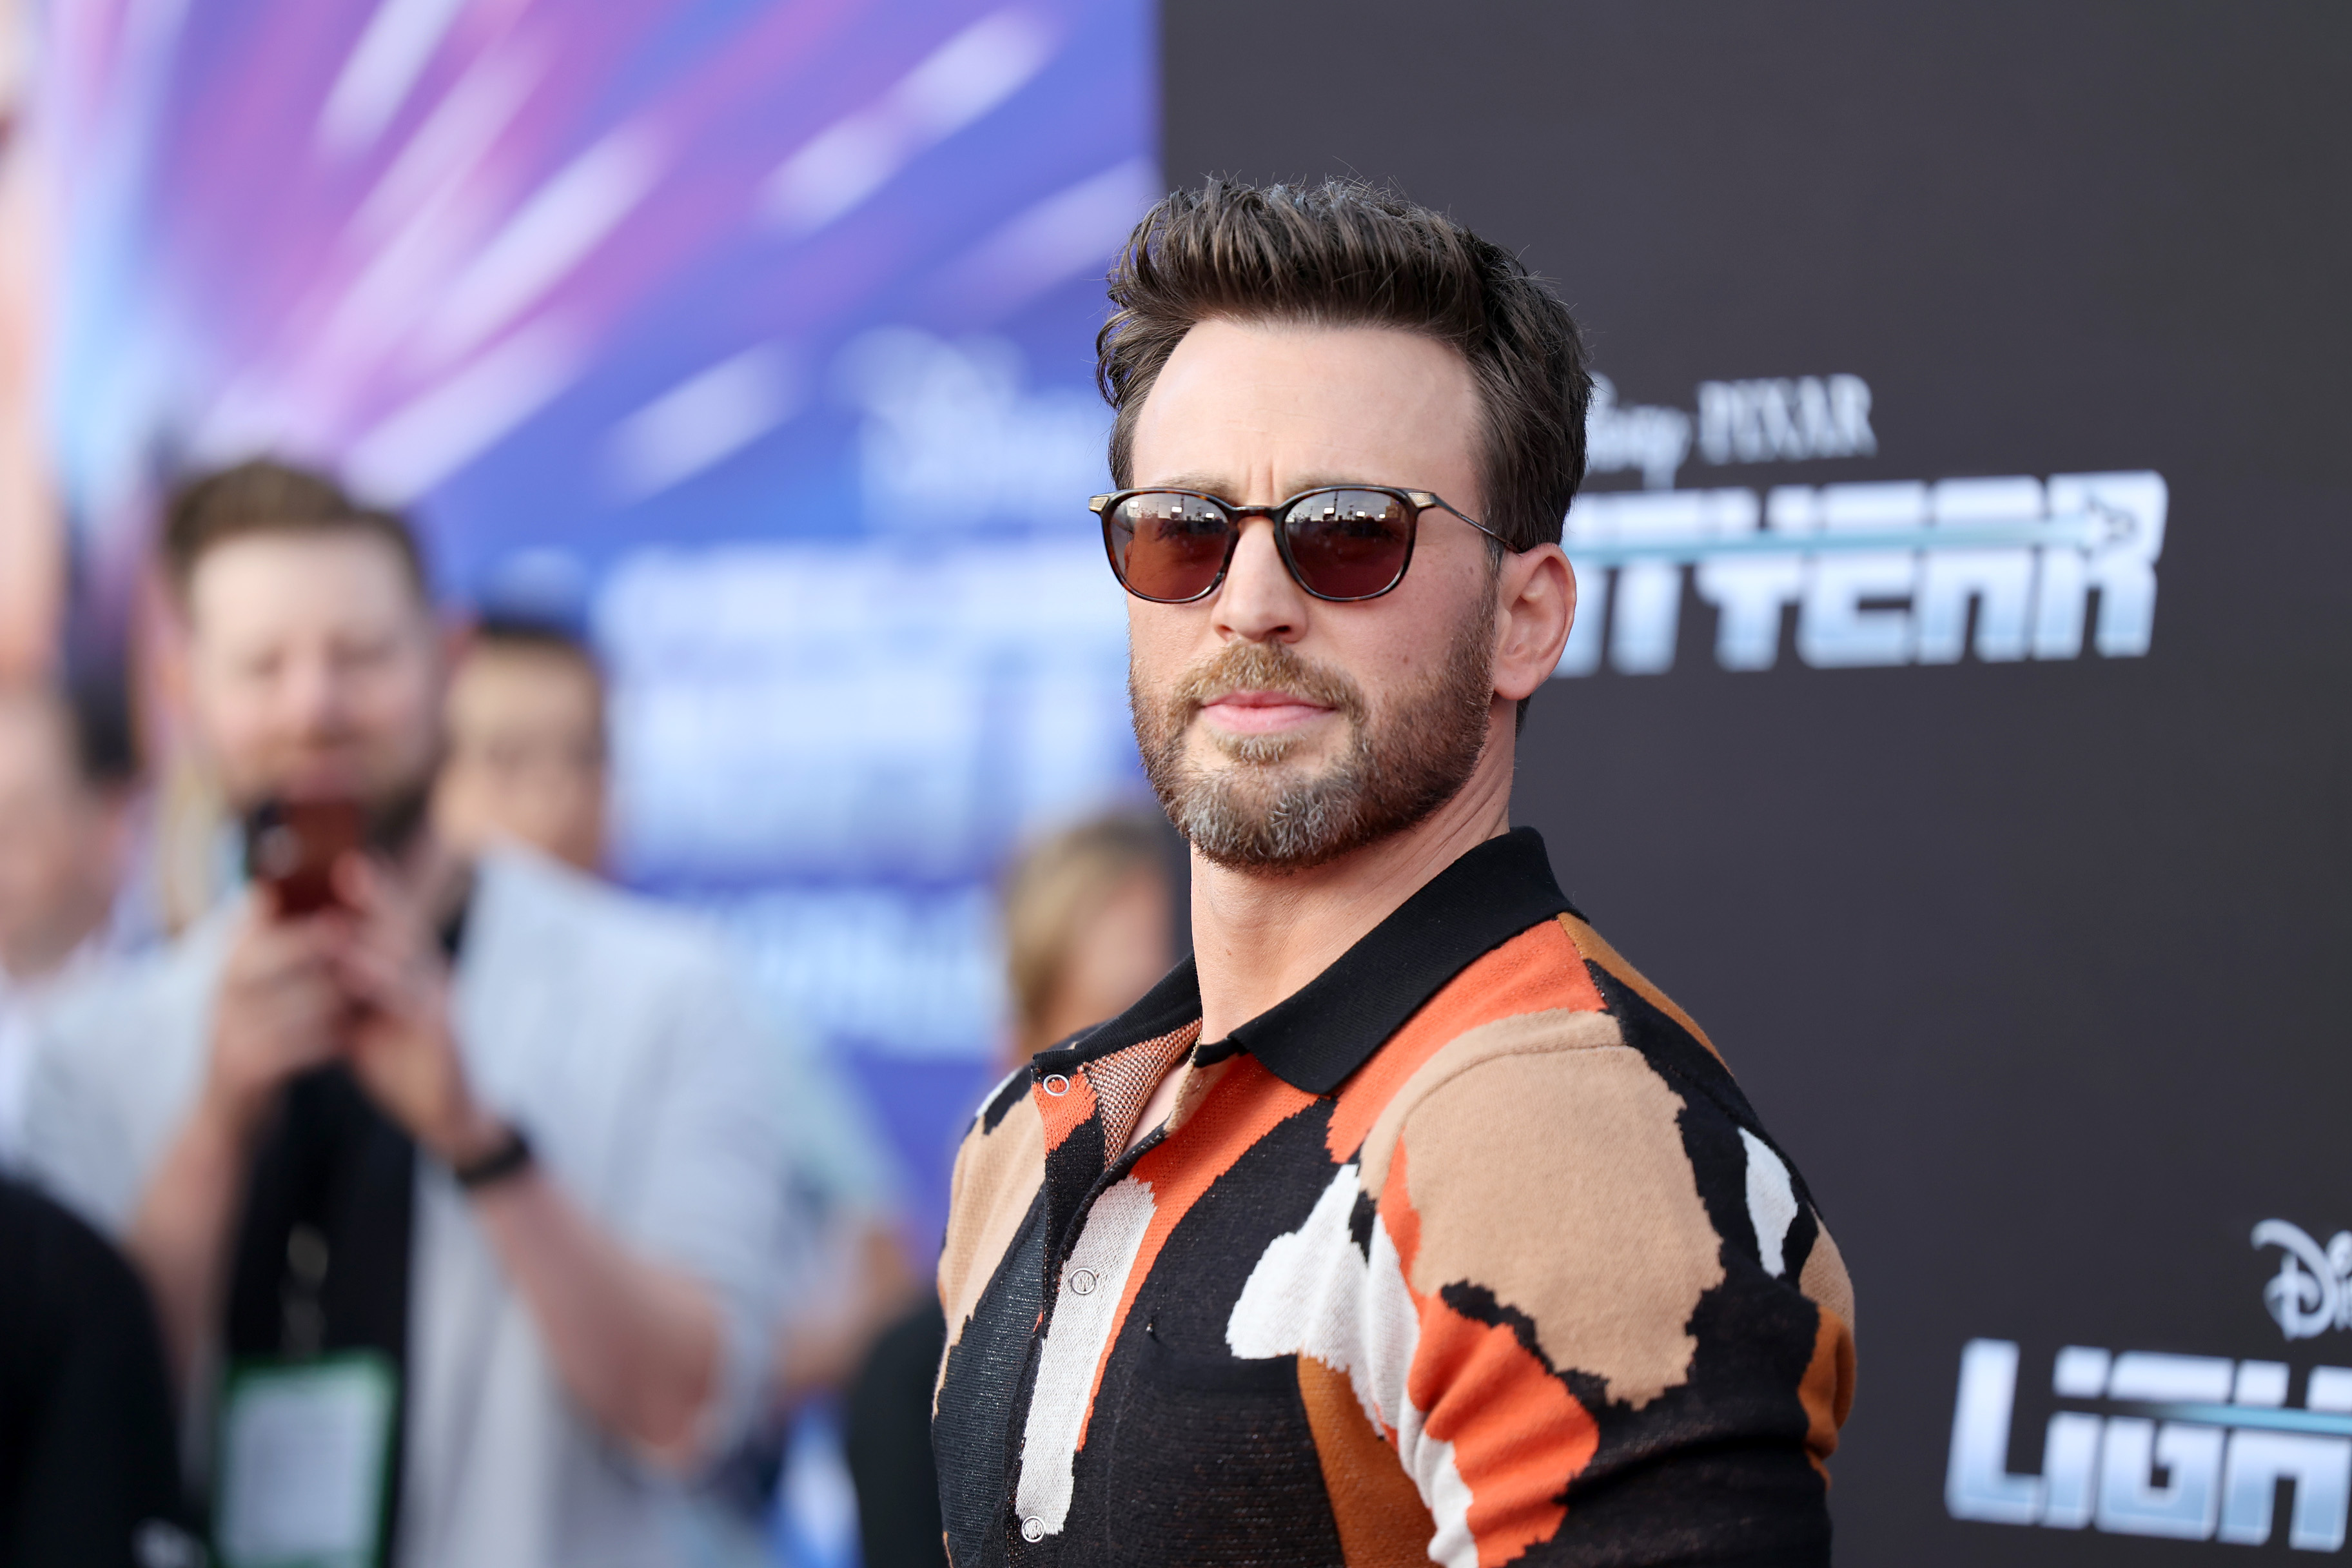 Chris Evans attends the world premiere of the Pixar movie Lightyear in Los Angeles